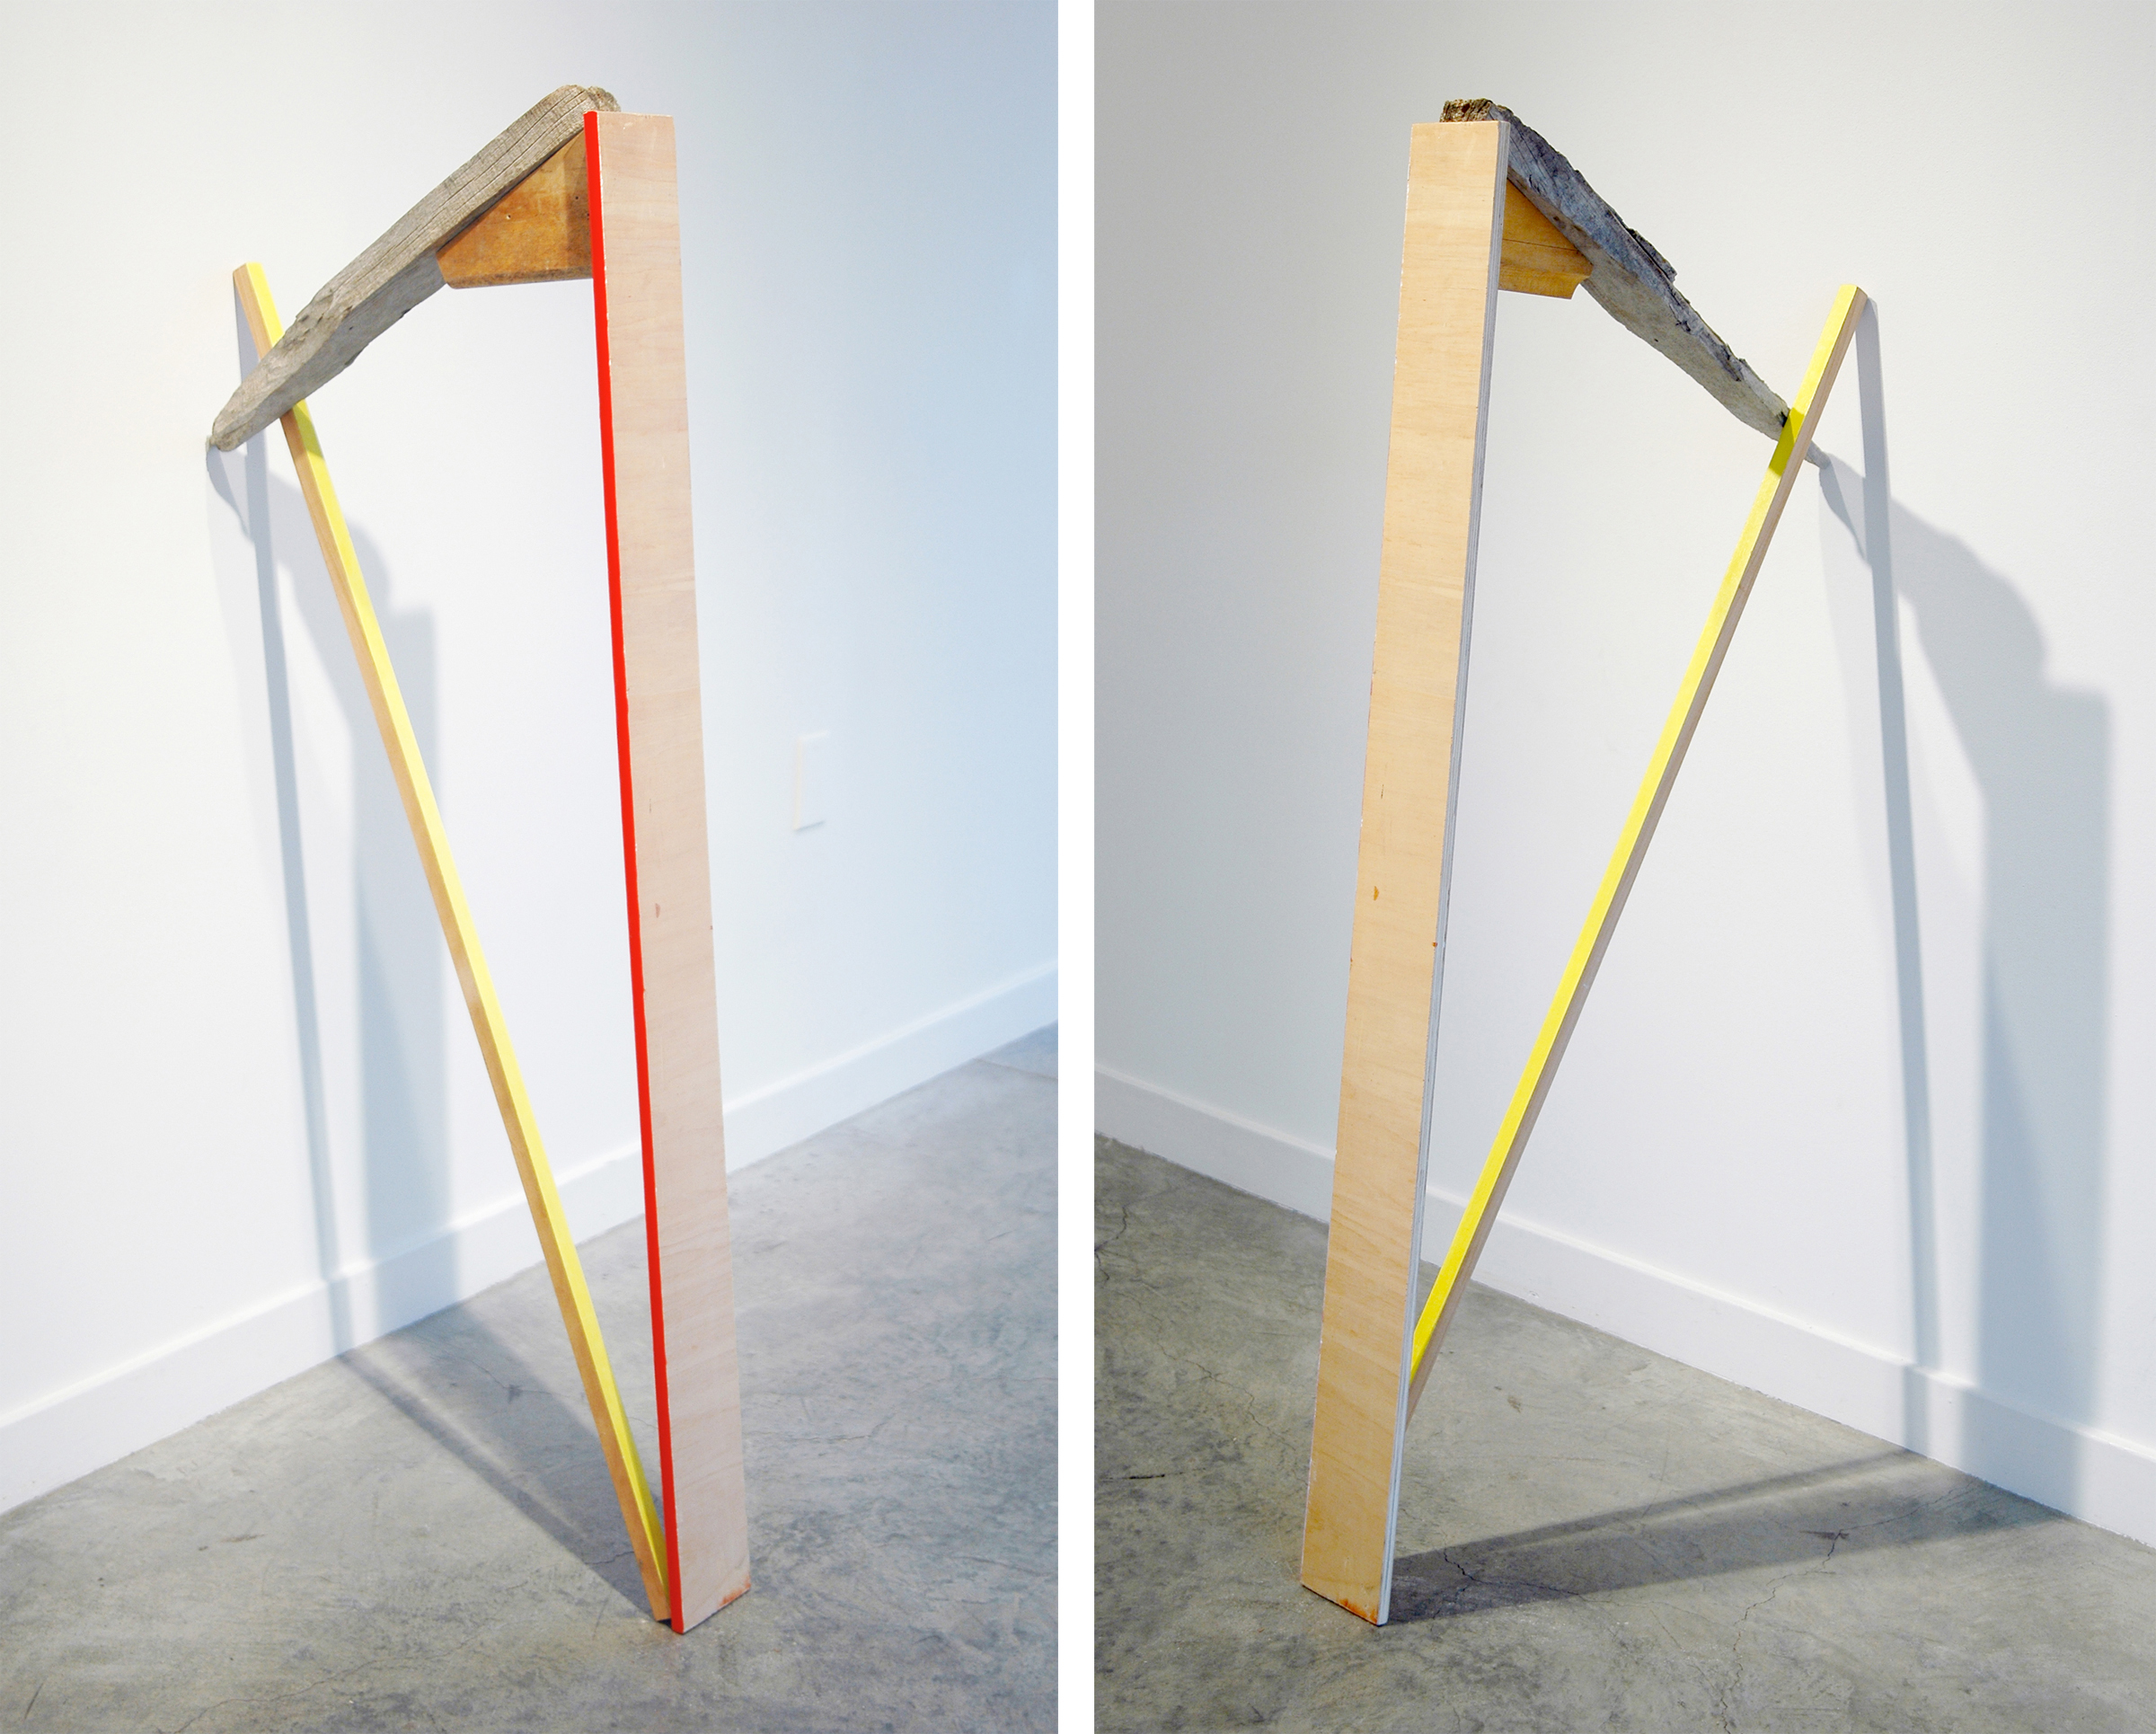   KIRK STOLLER   Untitled (harp) , wood, acrylic and resin, 48" x 23" x 5" 